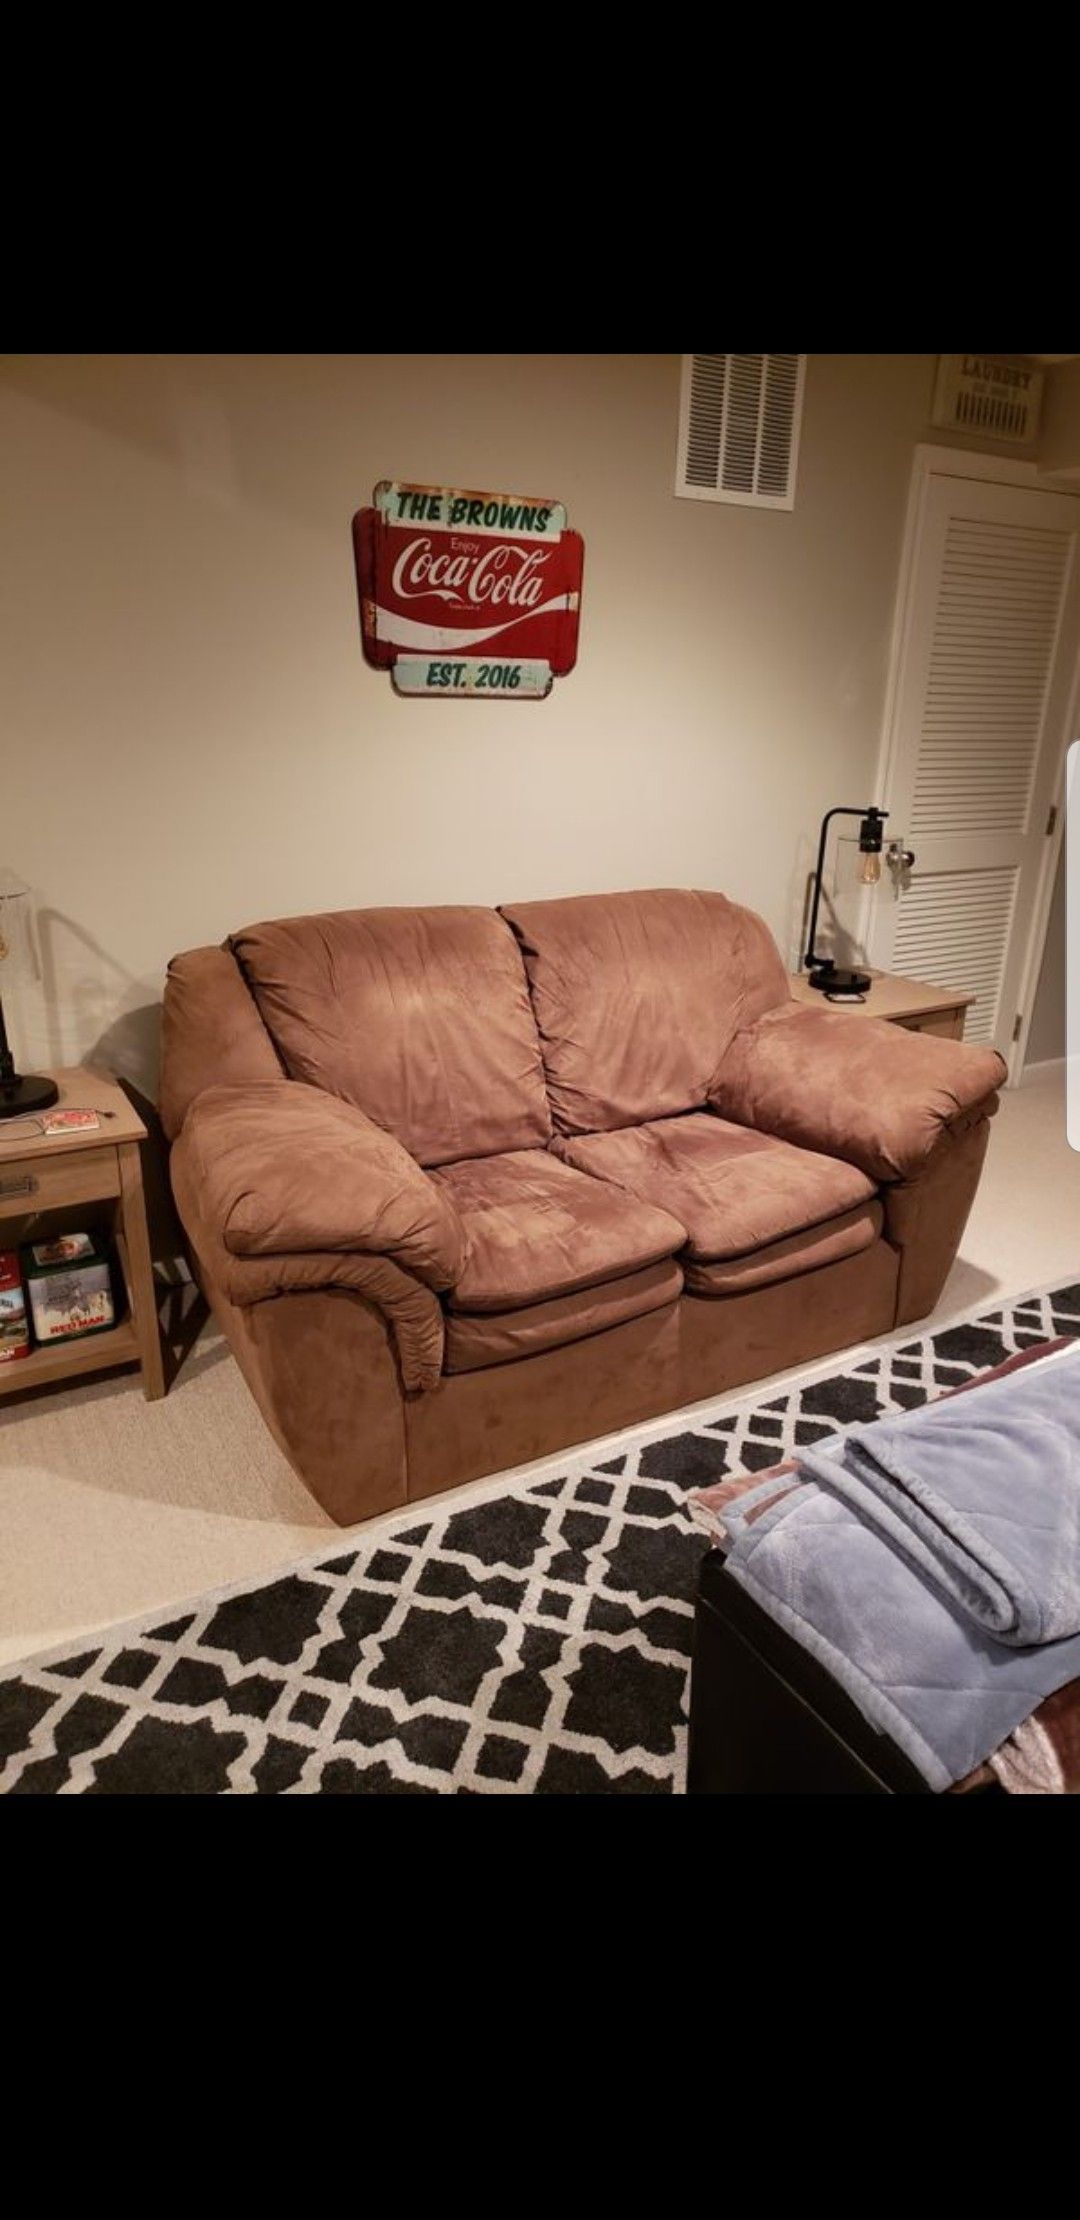 Upholstered barely used love seat FREE